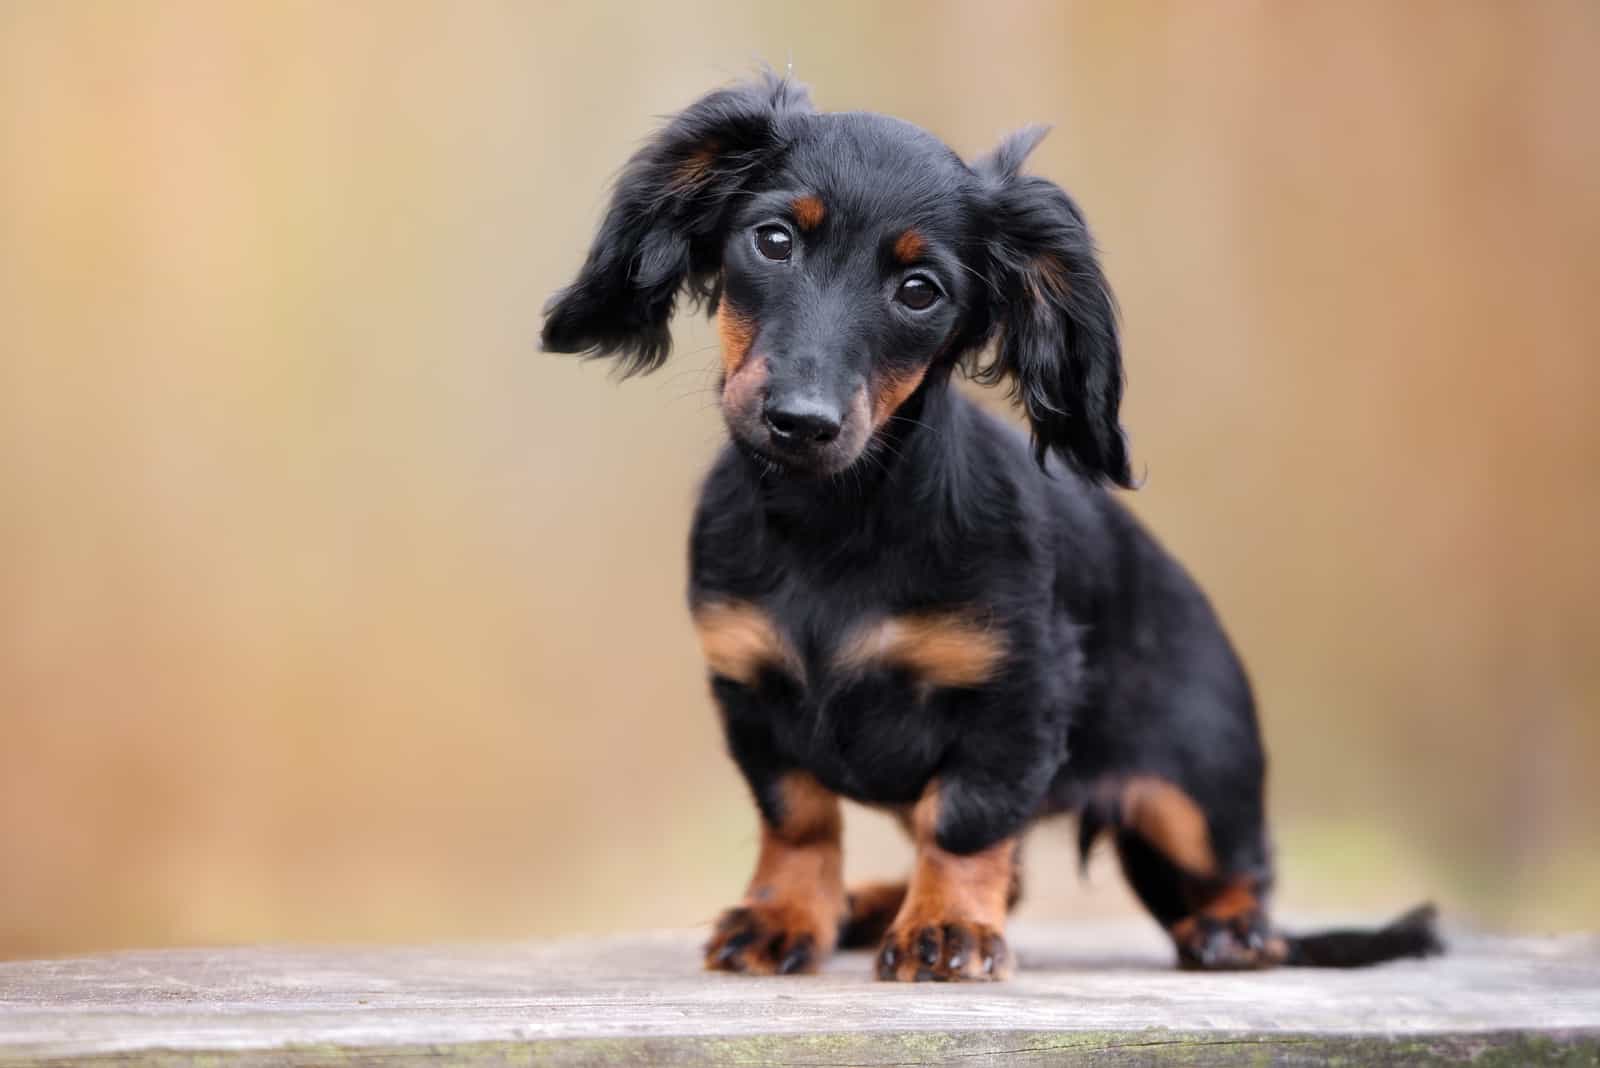 Are Dachshunds Hypoallergenic? Doxie Dogs And Allergies